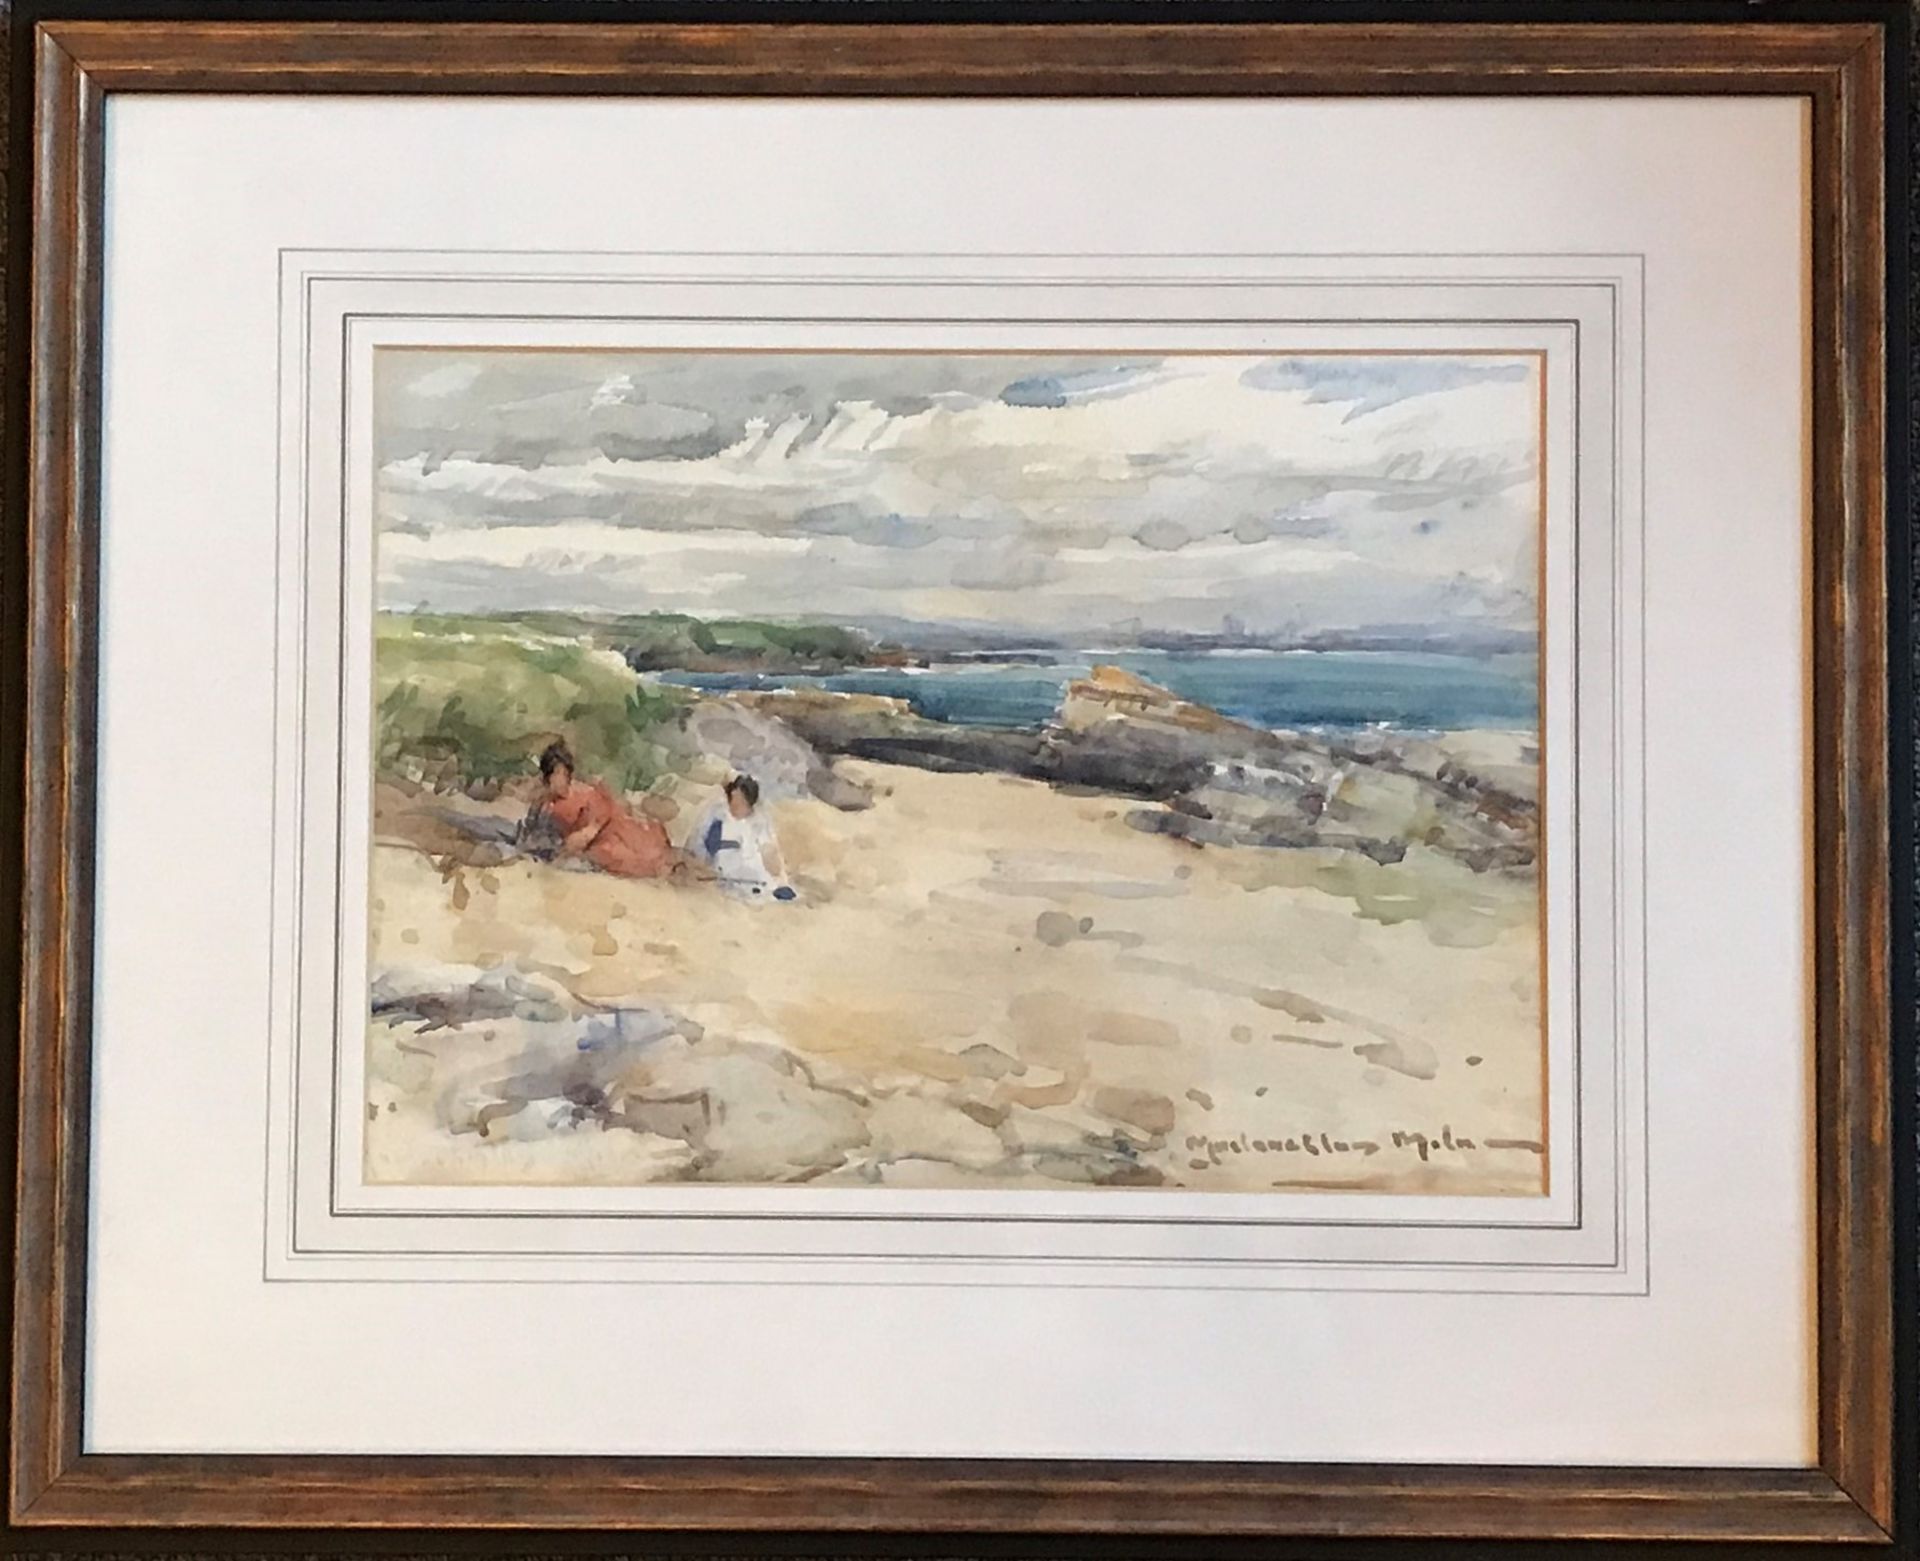 Playing in the dunes watercolour by Scottish artist John Maclauchlan Milne 1886-1957 A.R.S.A, R.S.A - Image 3 of 3